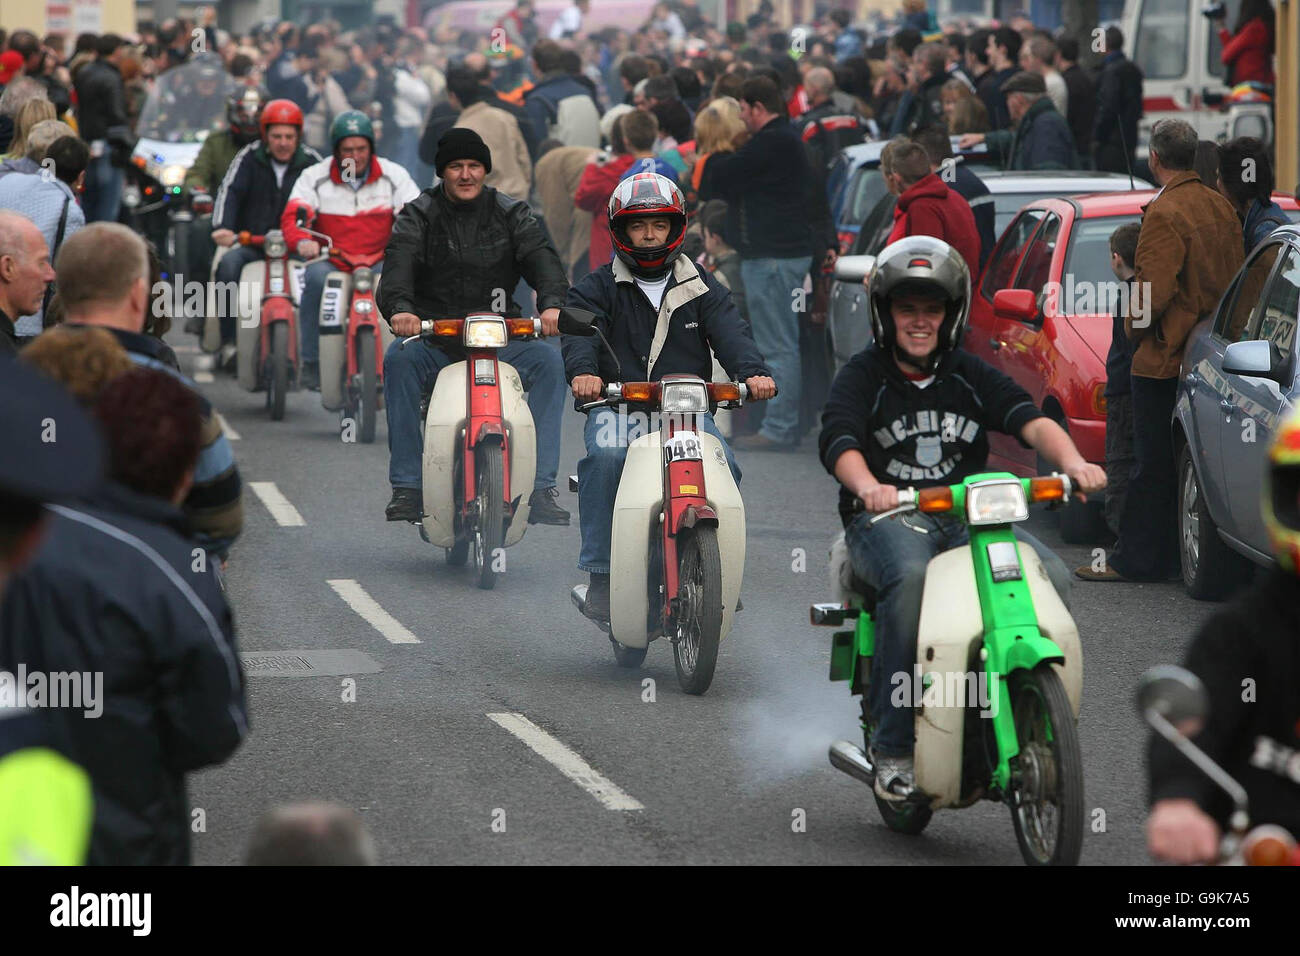 Honda 50 owners take part in the Great Honda 50 run part of the Annual Culchie Festival in Athboy, Co Meath. Stock Photo